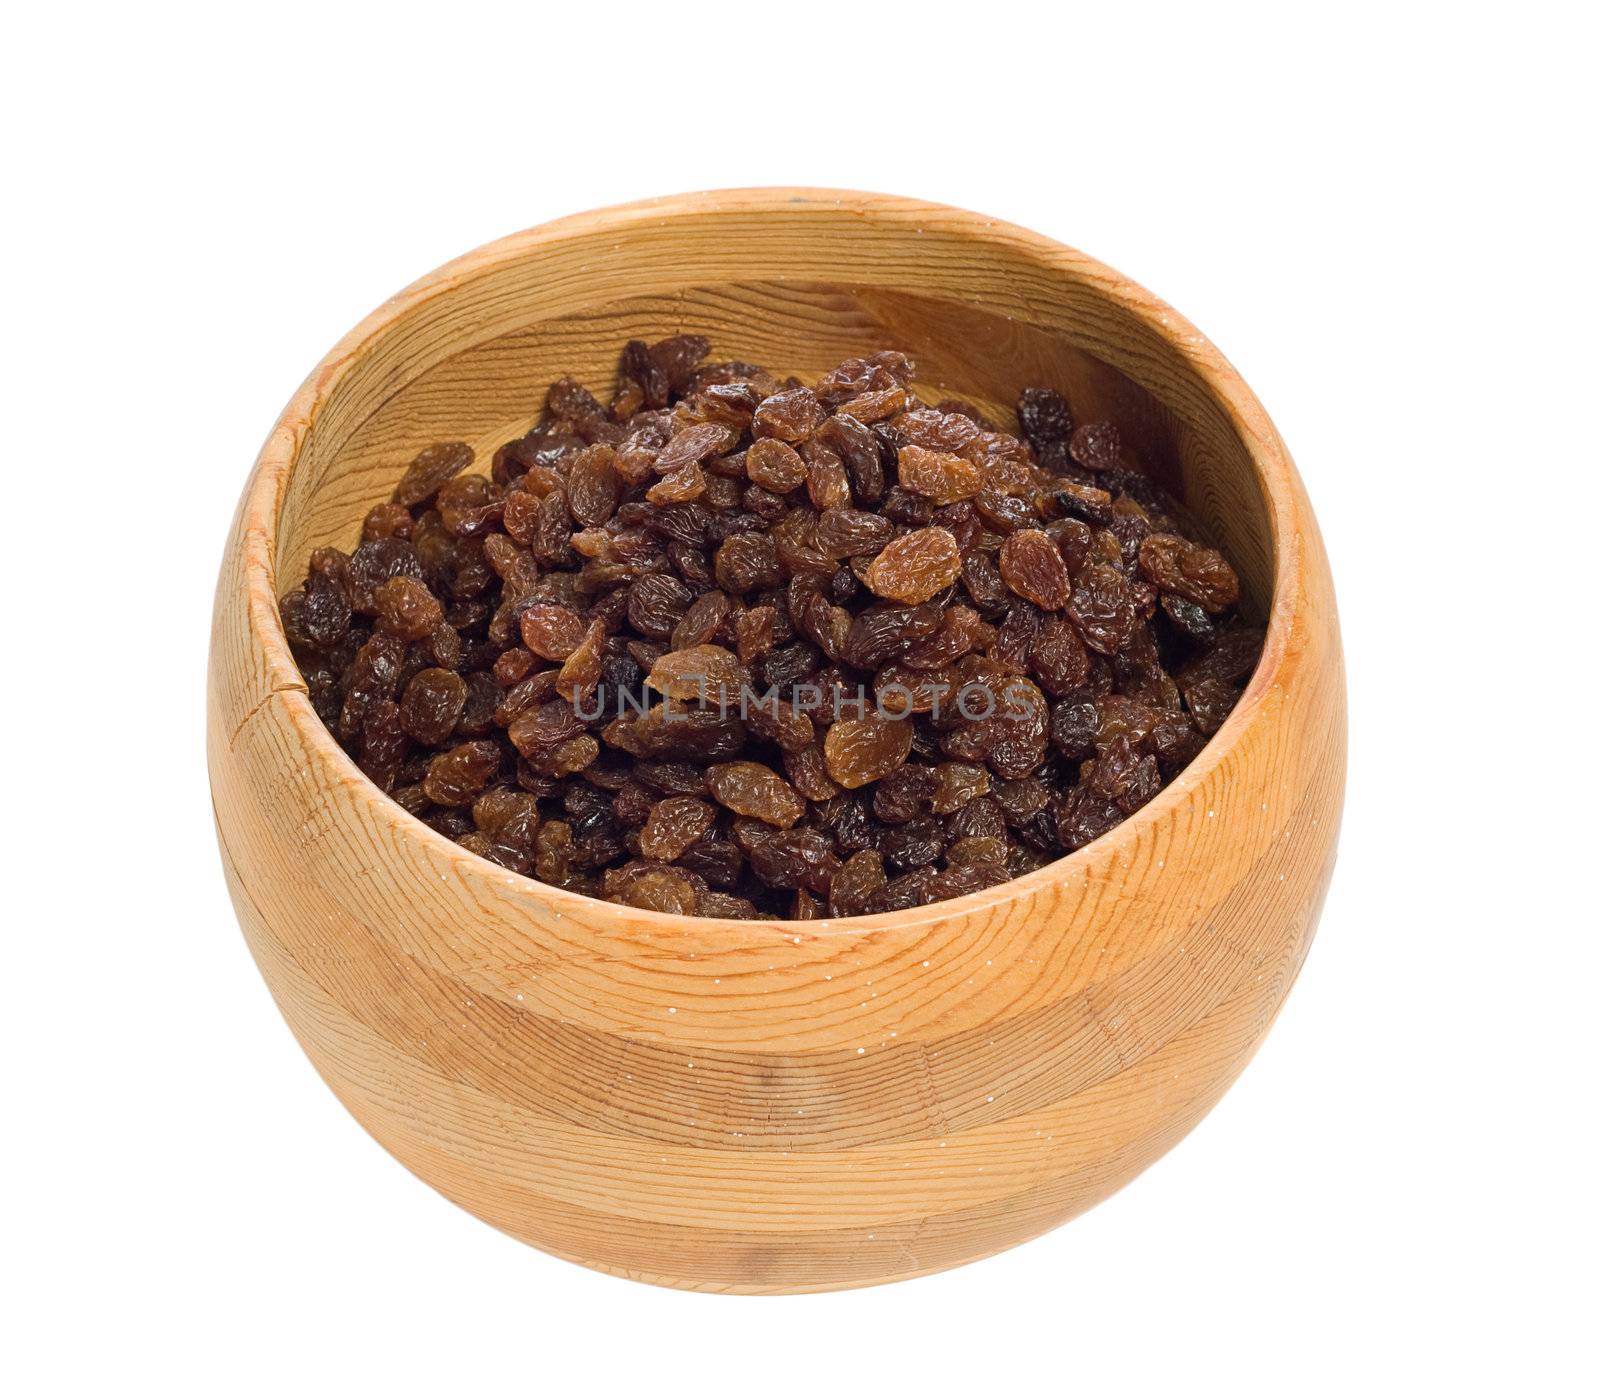 A wooden bowl filled with raisins, isolated against a white background